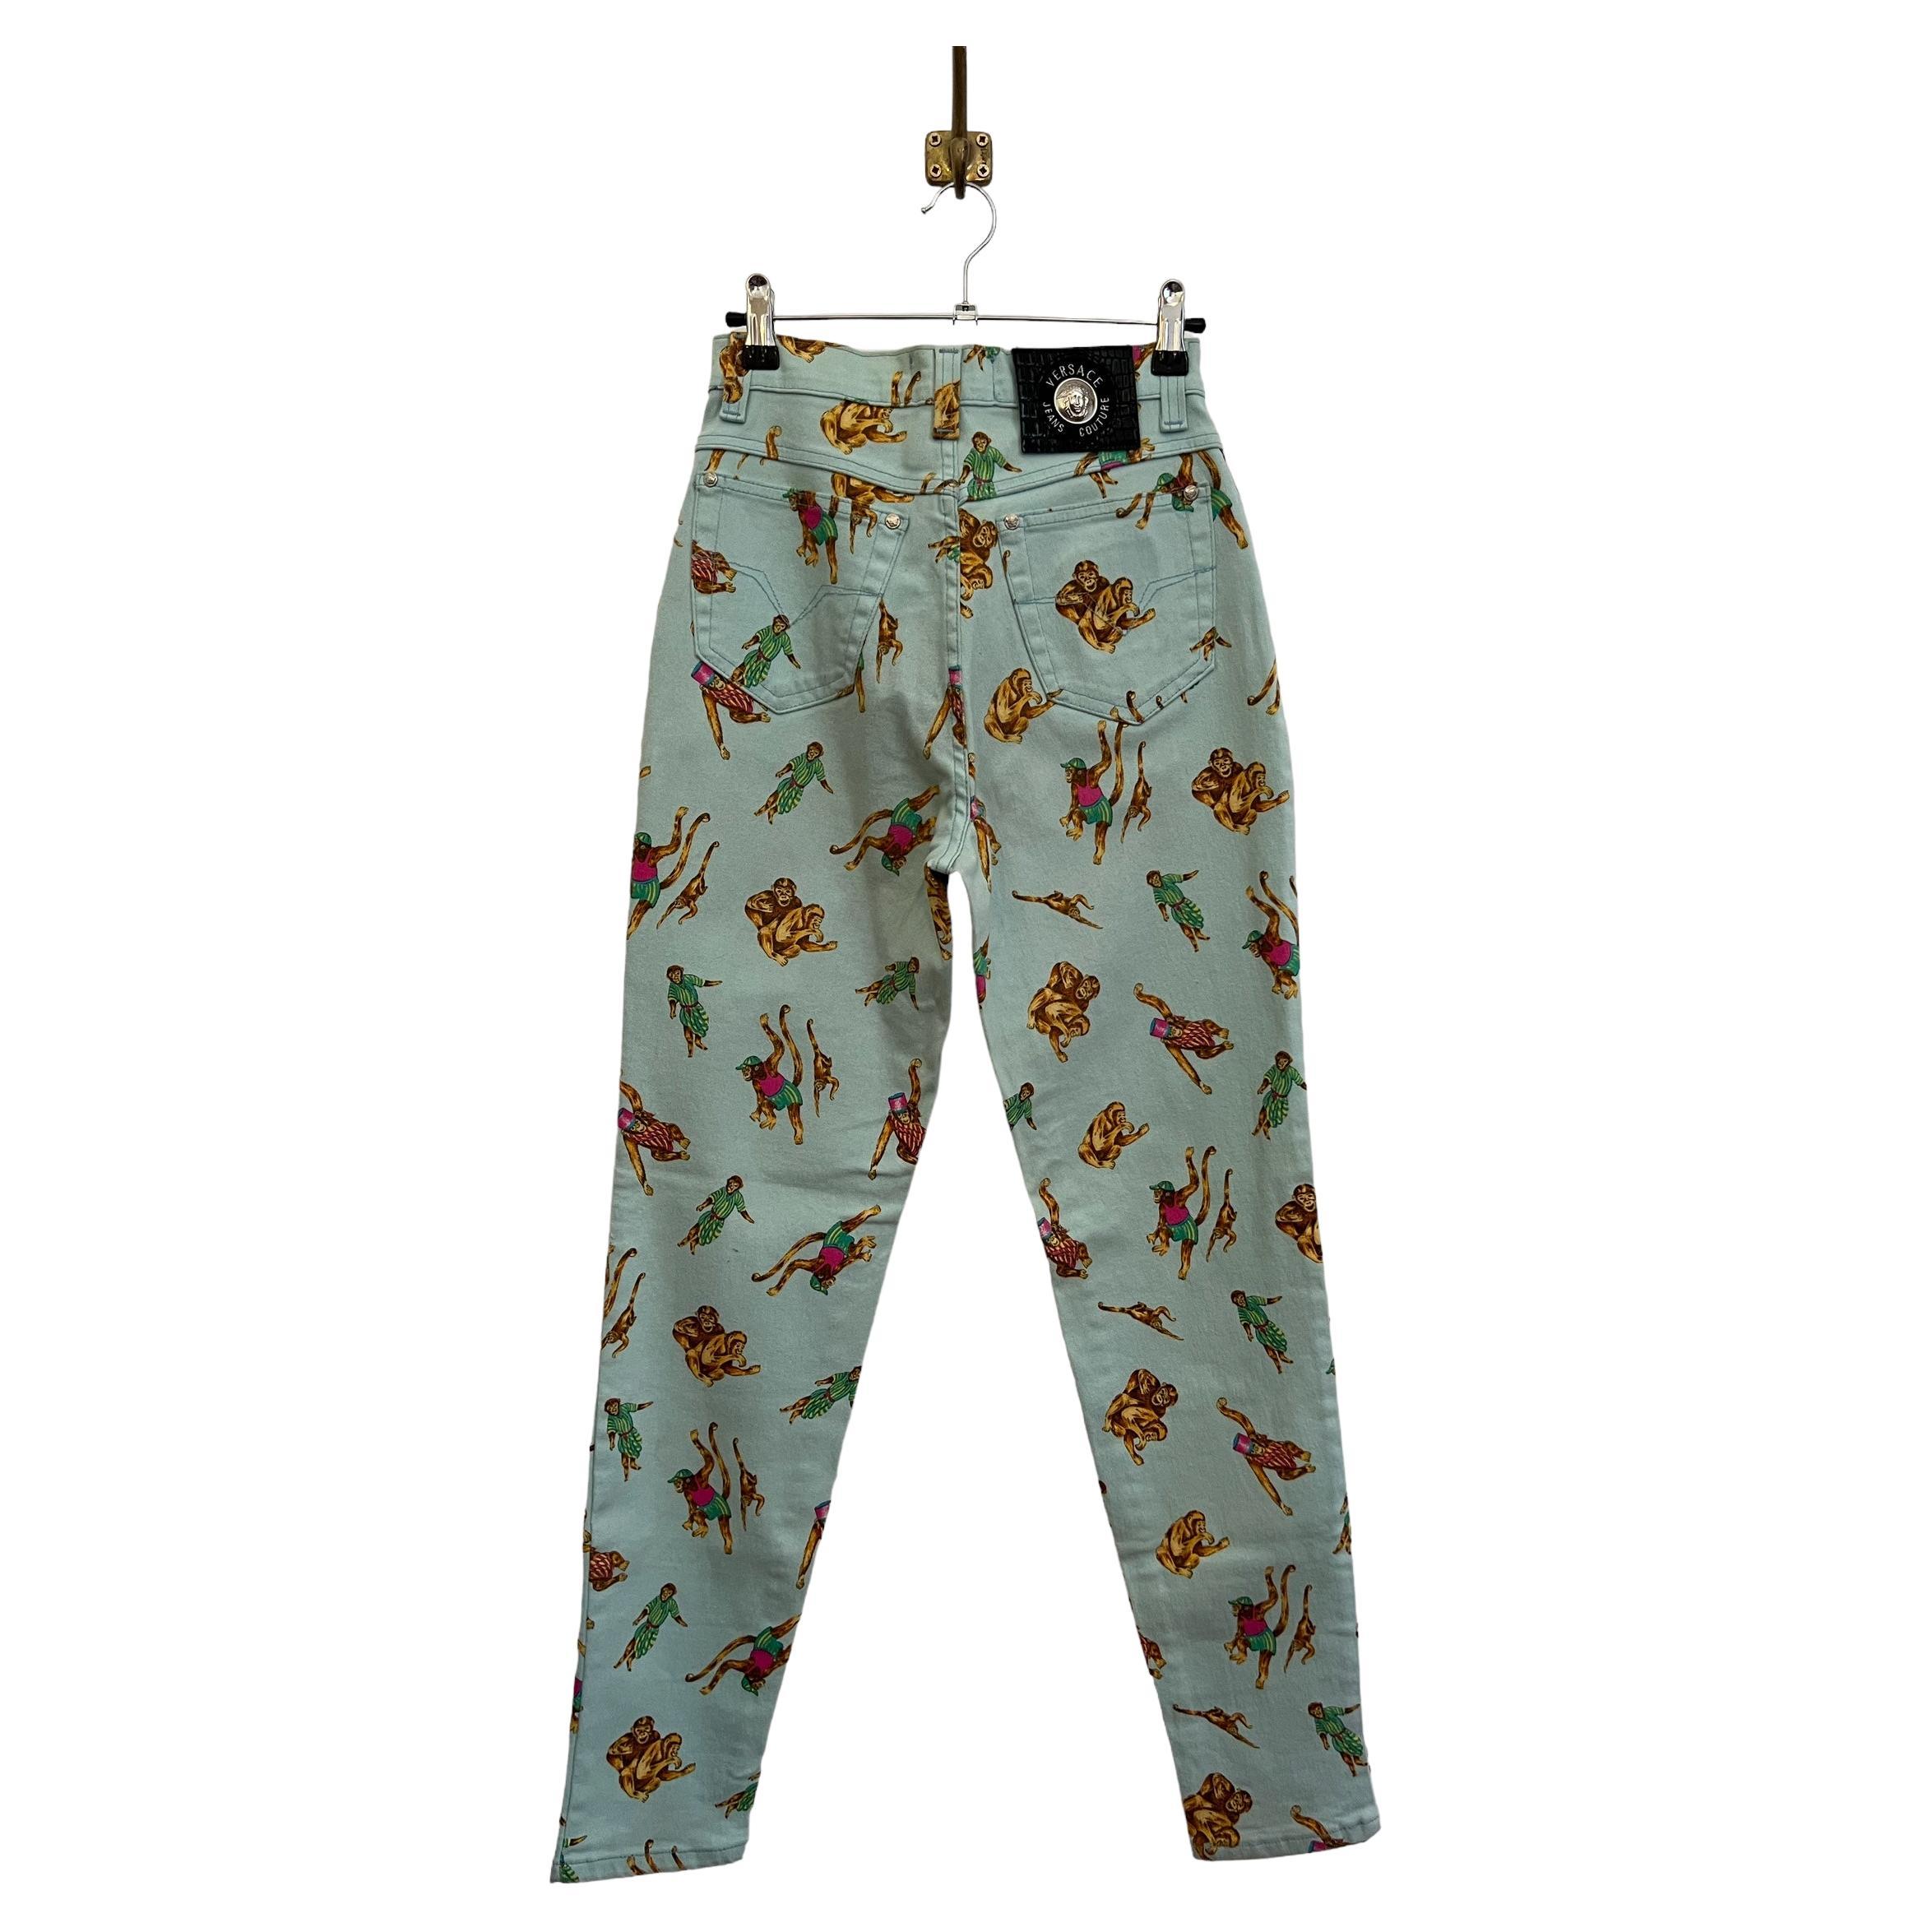 Fun 1990's Gianni Versace High waisted Colourful Monkey Cartoon pattern Jeans For Sale